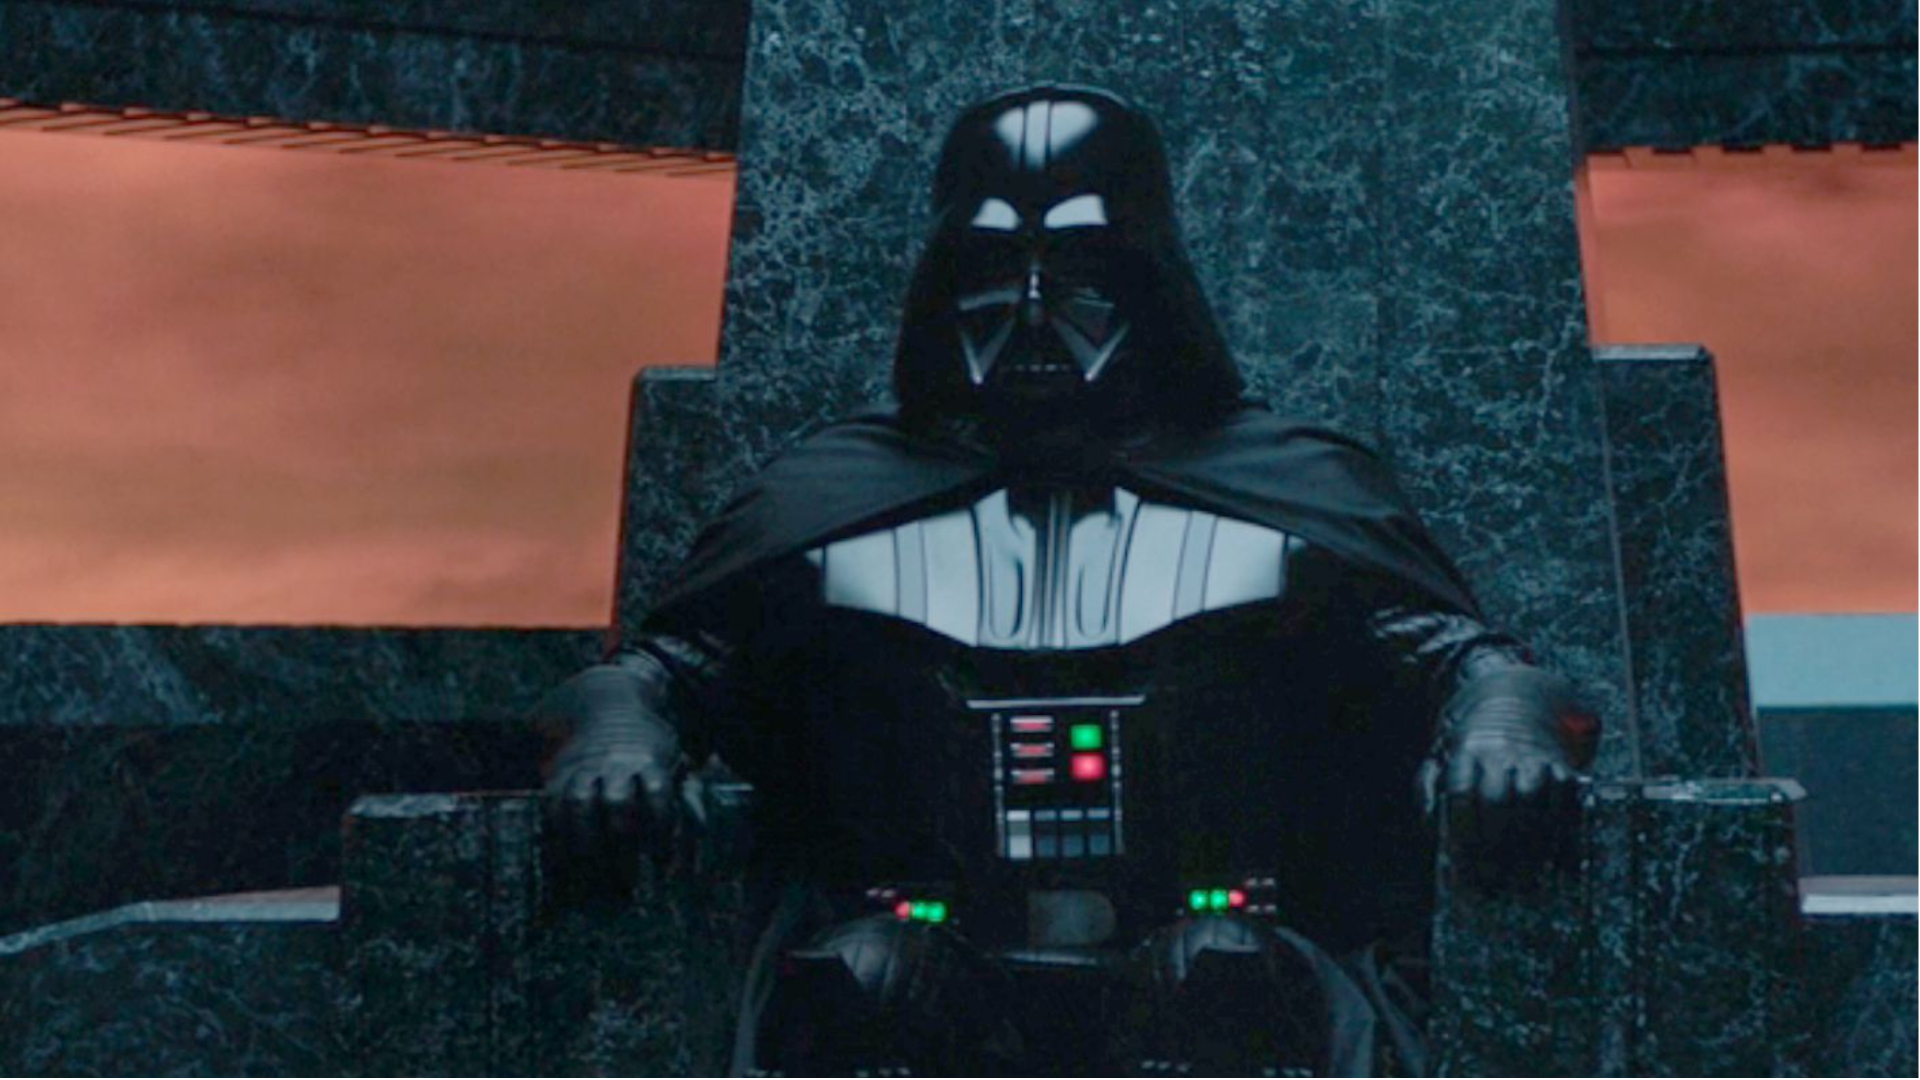 Vader sitting on his throne in Fortress Vader in Obi-Wan Kenobi.